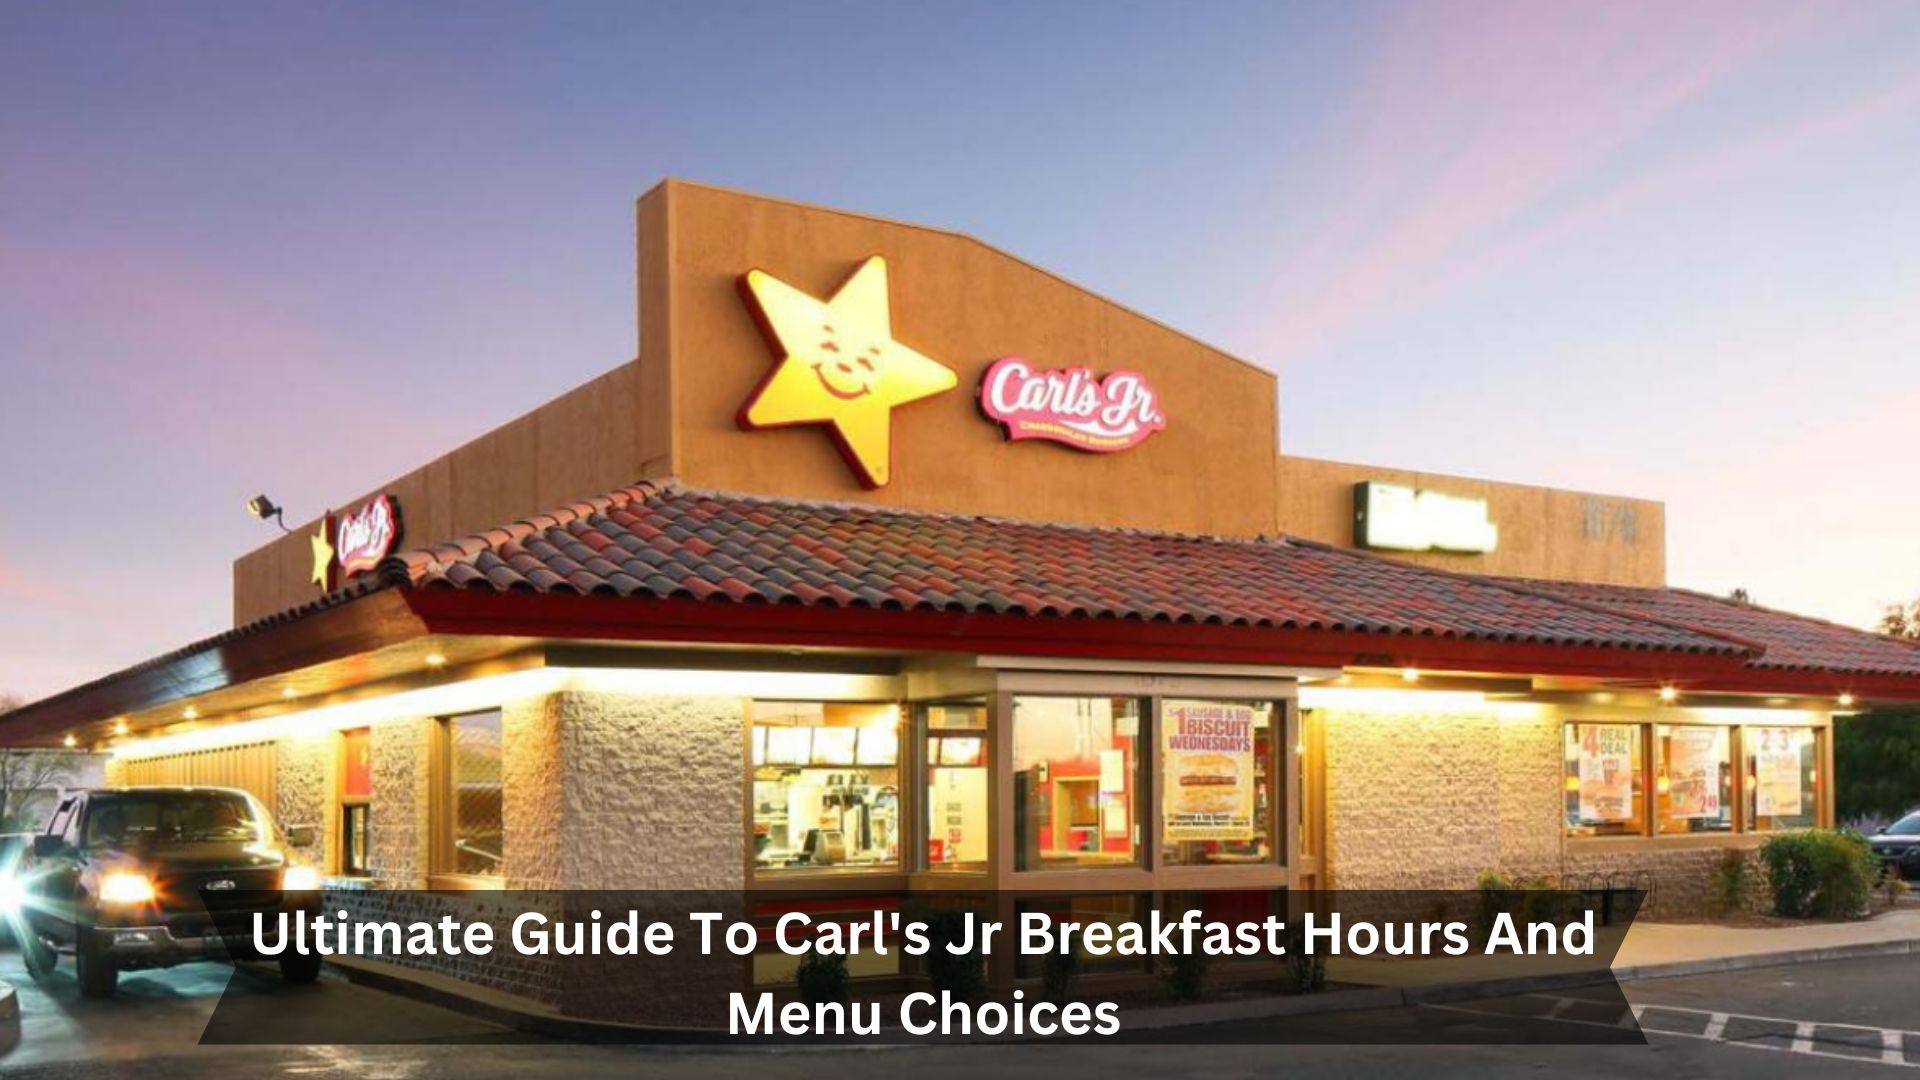 Ultimate-Guide-To-Carls-Jr-Breakfast-Hours-And-Menu-Choices